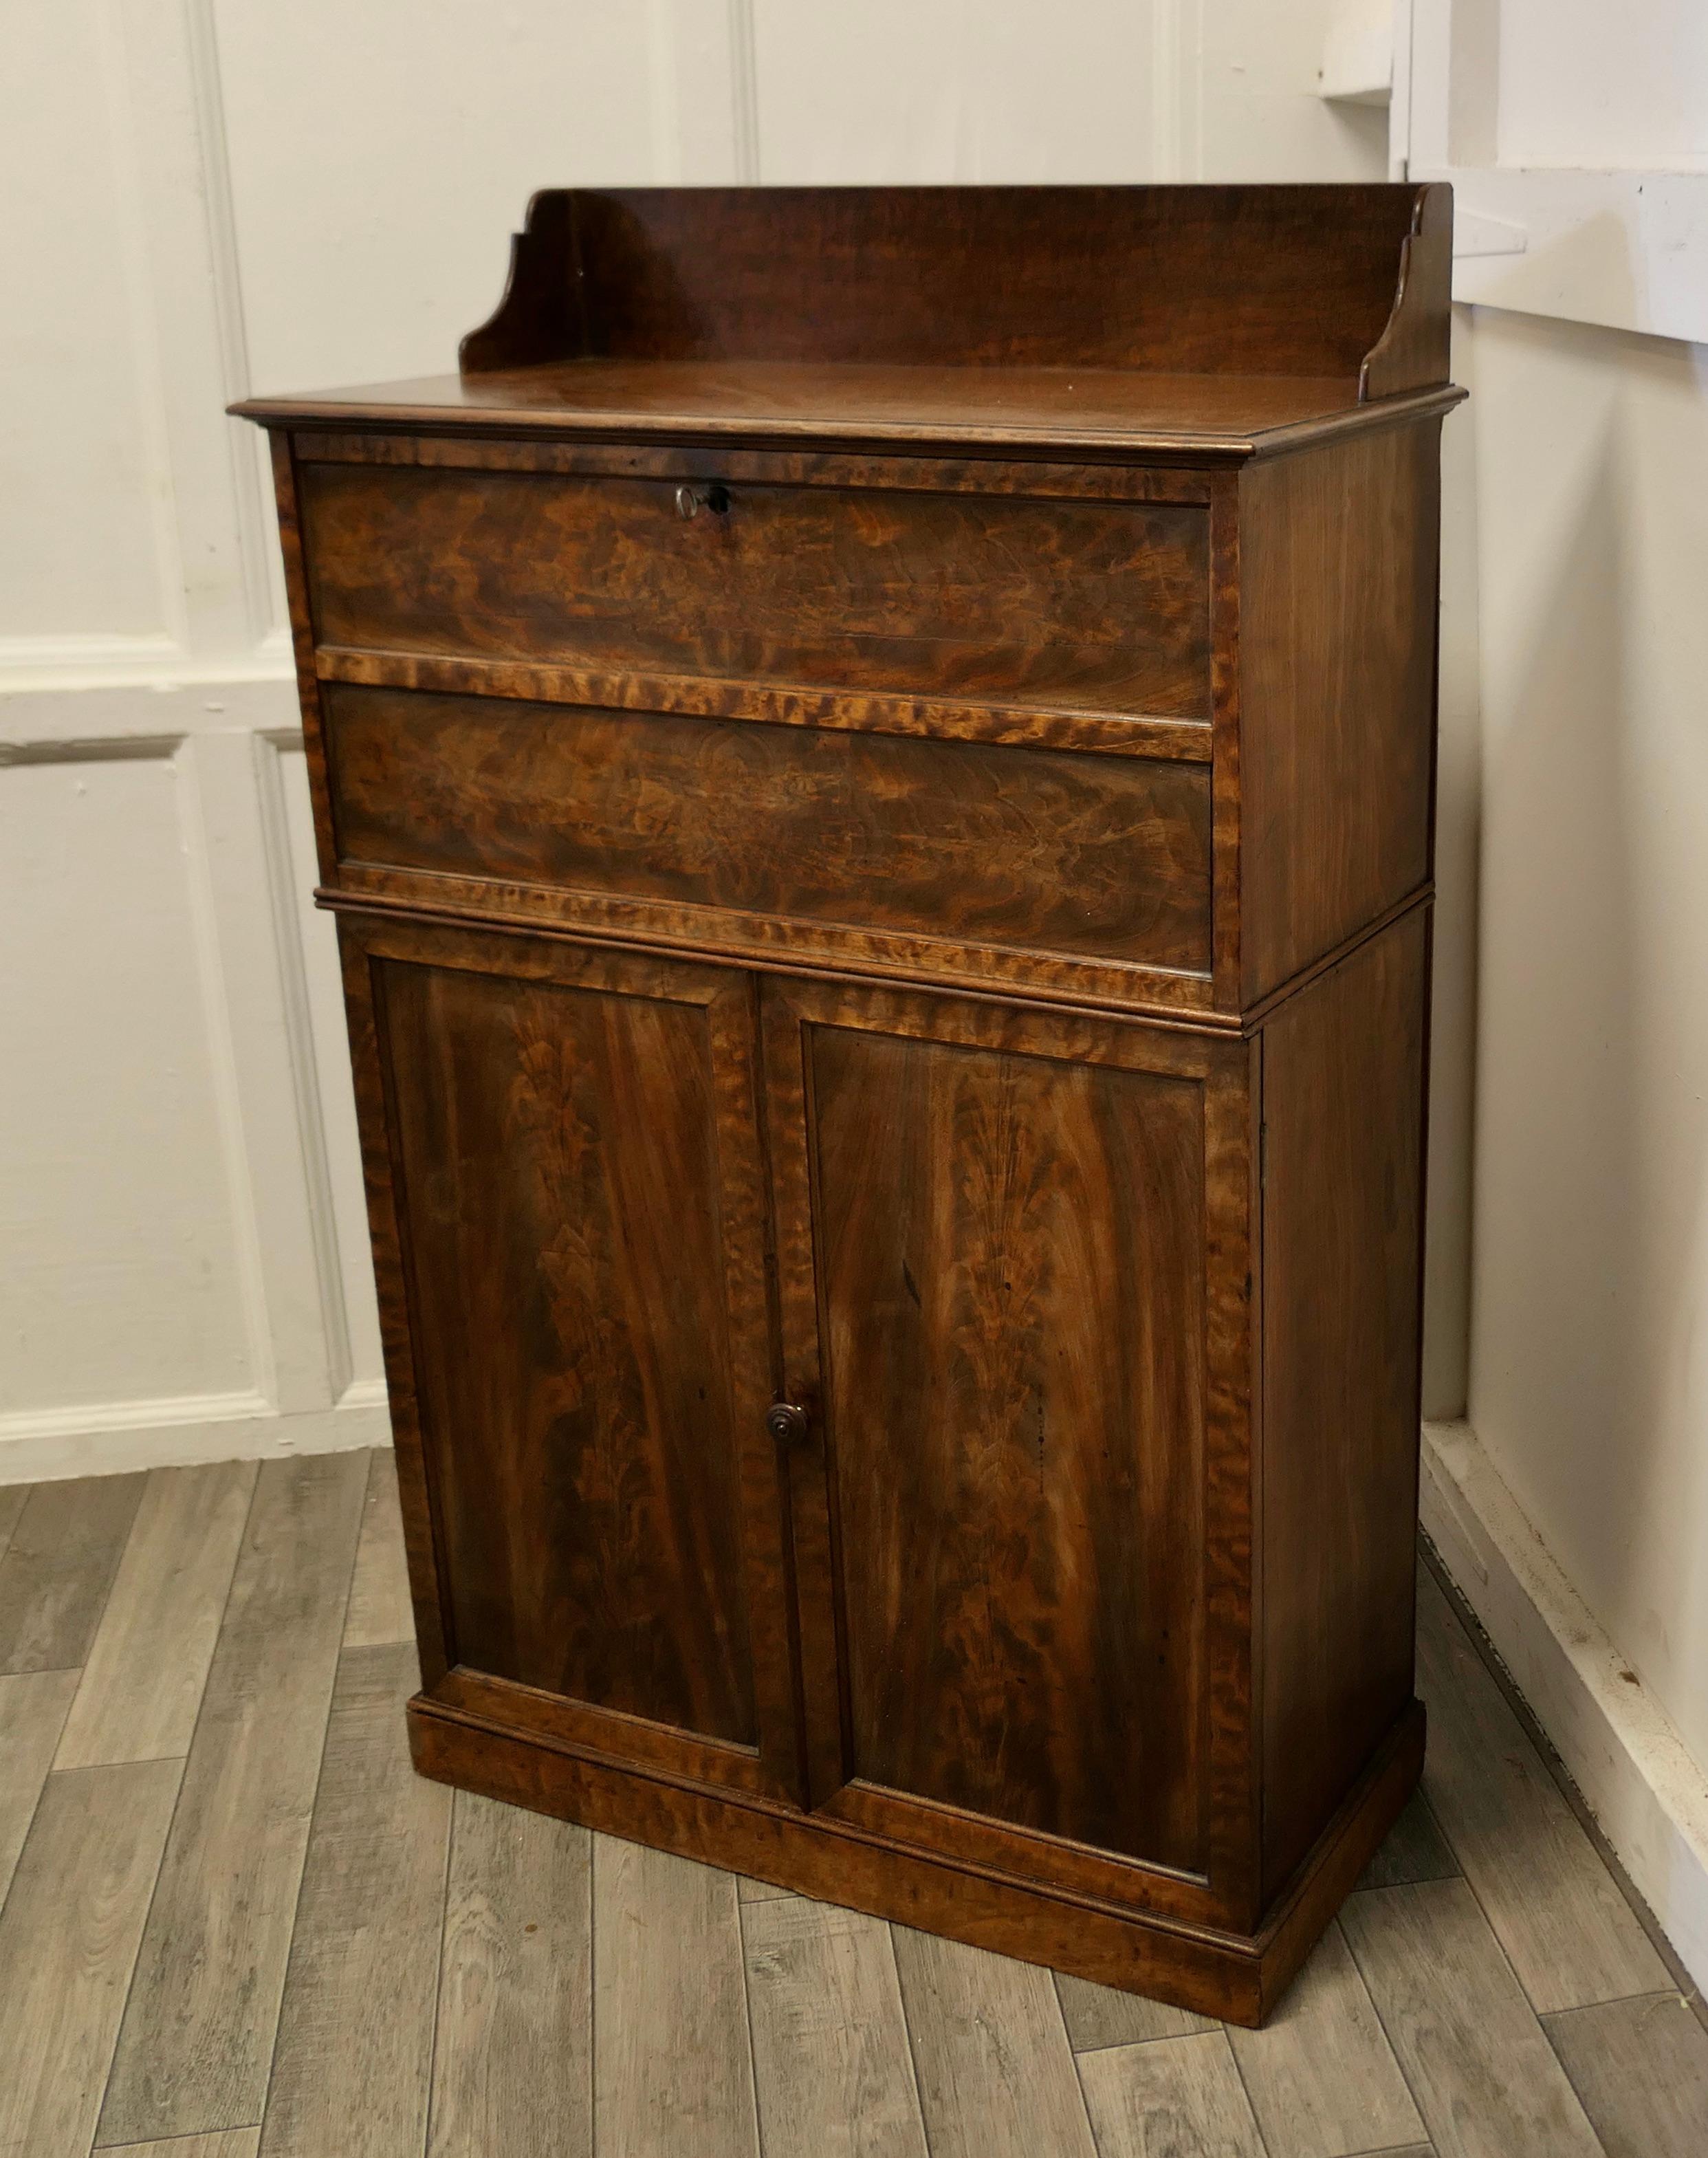 Figured Walnut hotel restaurant reception hostess greeting station, greeter.


A very neat Front of House Walnut Reception Greeter, the front of the desk has a small gallery over a panelled face. At the reception side there is a lockable leather